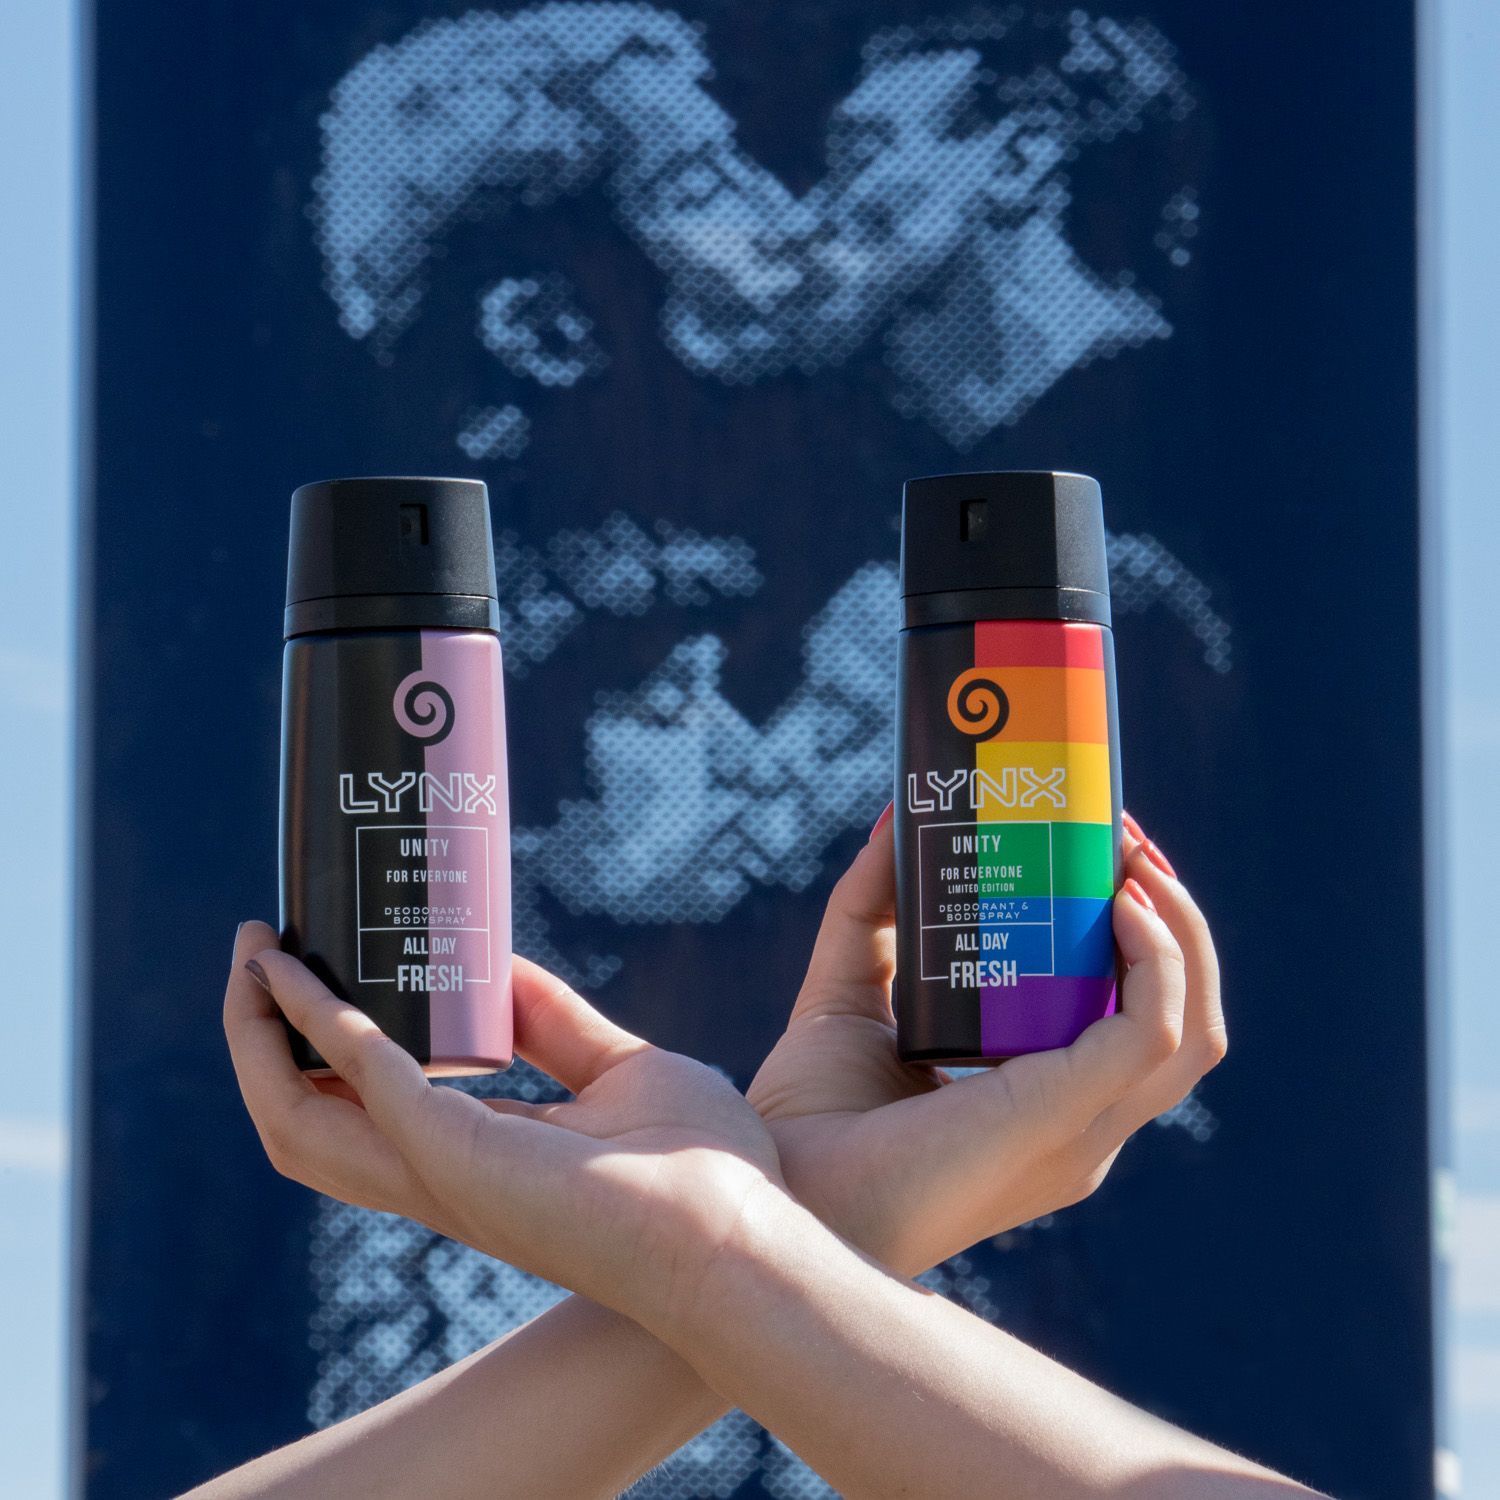 Rimpelingen T bal Brighton & Hove Pride on Twitter: "How will you keep fresh while  celebrating Pride this year? Why not try out the 👉Fragrance for EVERYONE  👈 Lynx Unity deodorant and body spray limited